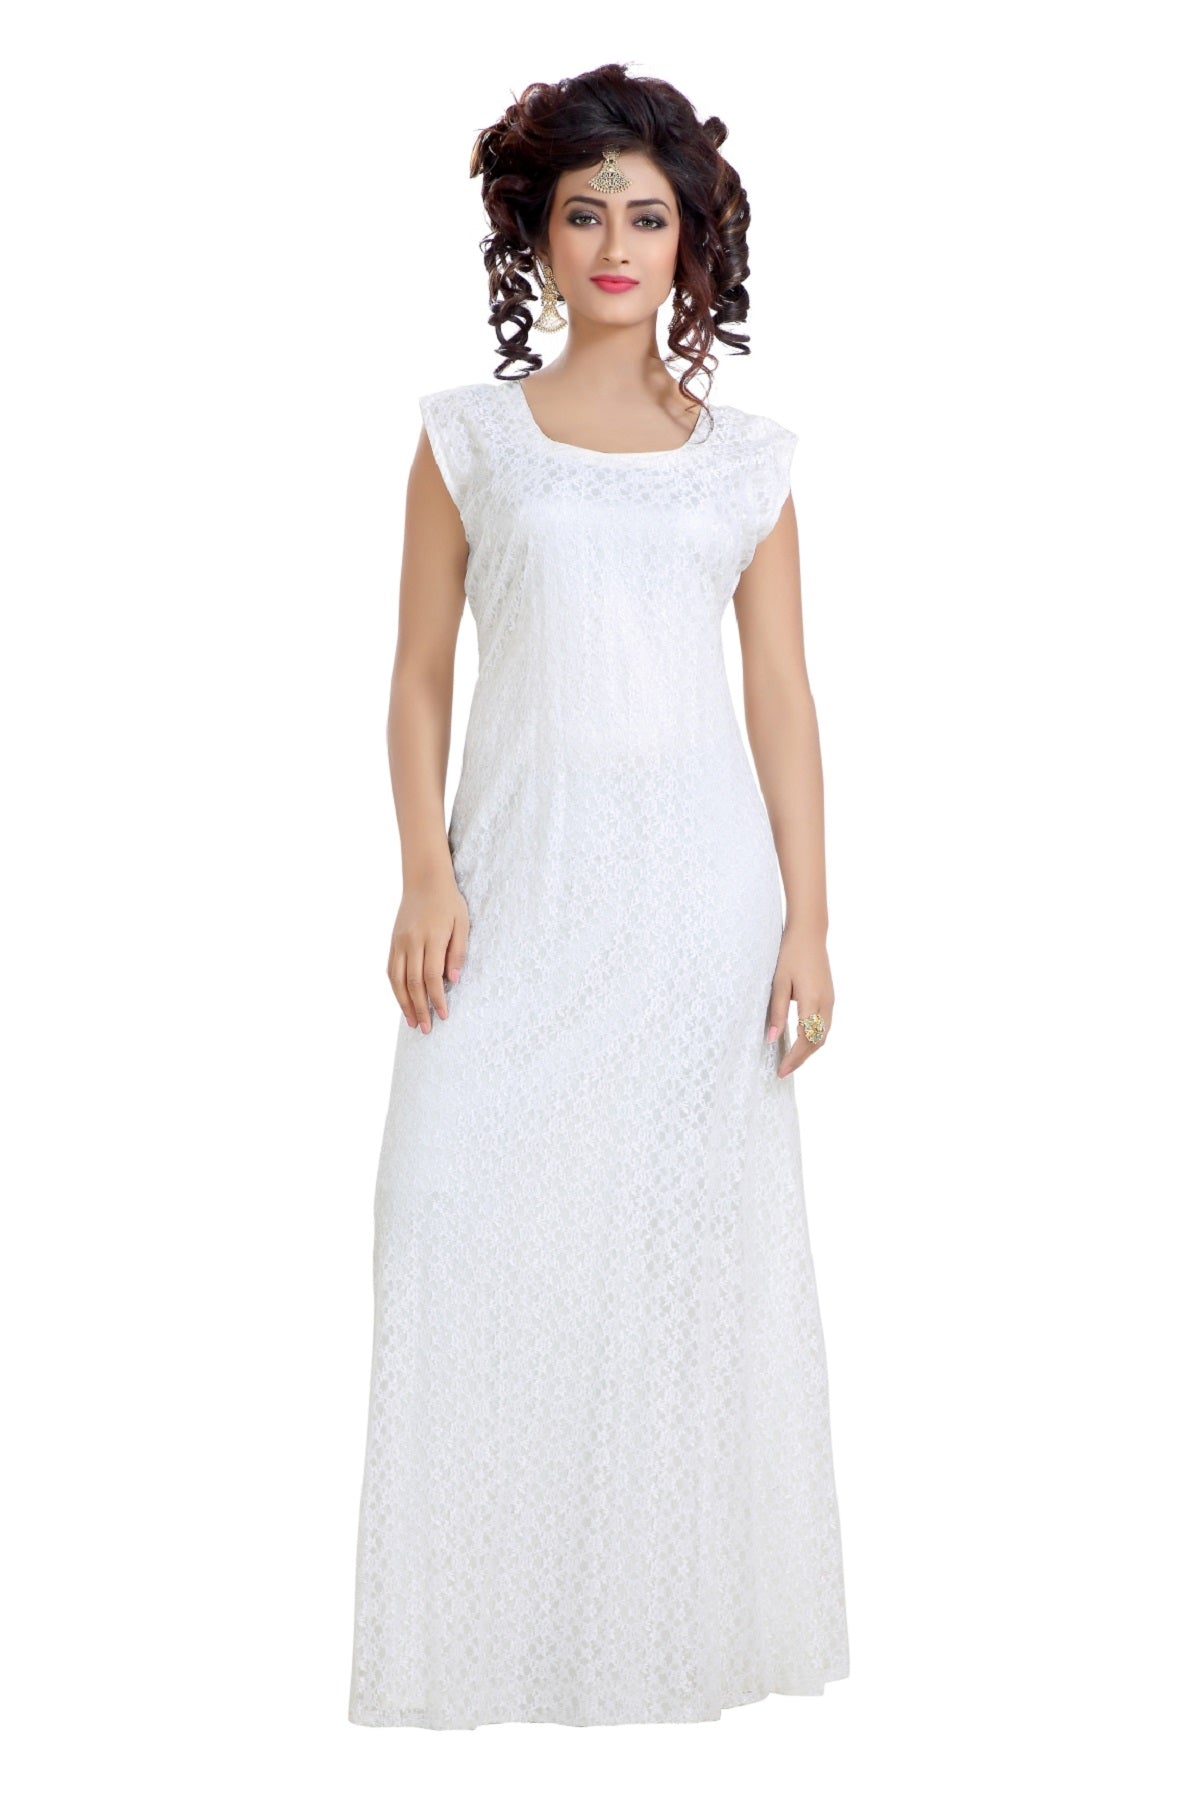 GLAMIFY Net/Lace Embroidered Gown/Anarkali Kurta & Bottom Material Price in  India - Buy GLAMIFY Net/Lace Embroidered Gown/Anarkali Kurta & Bottom  Material online at Flipkart.com